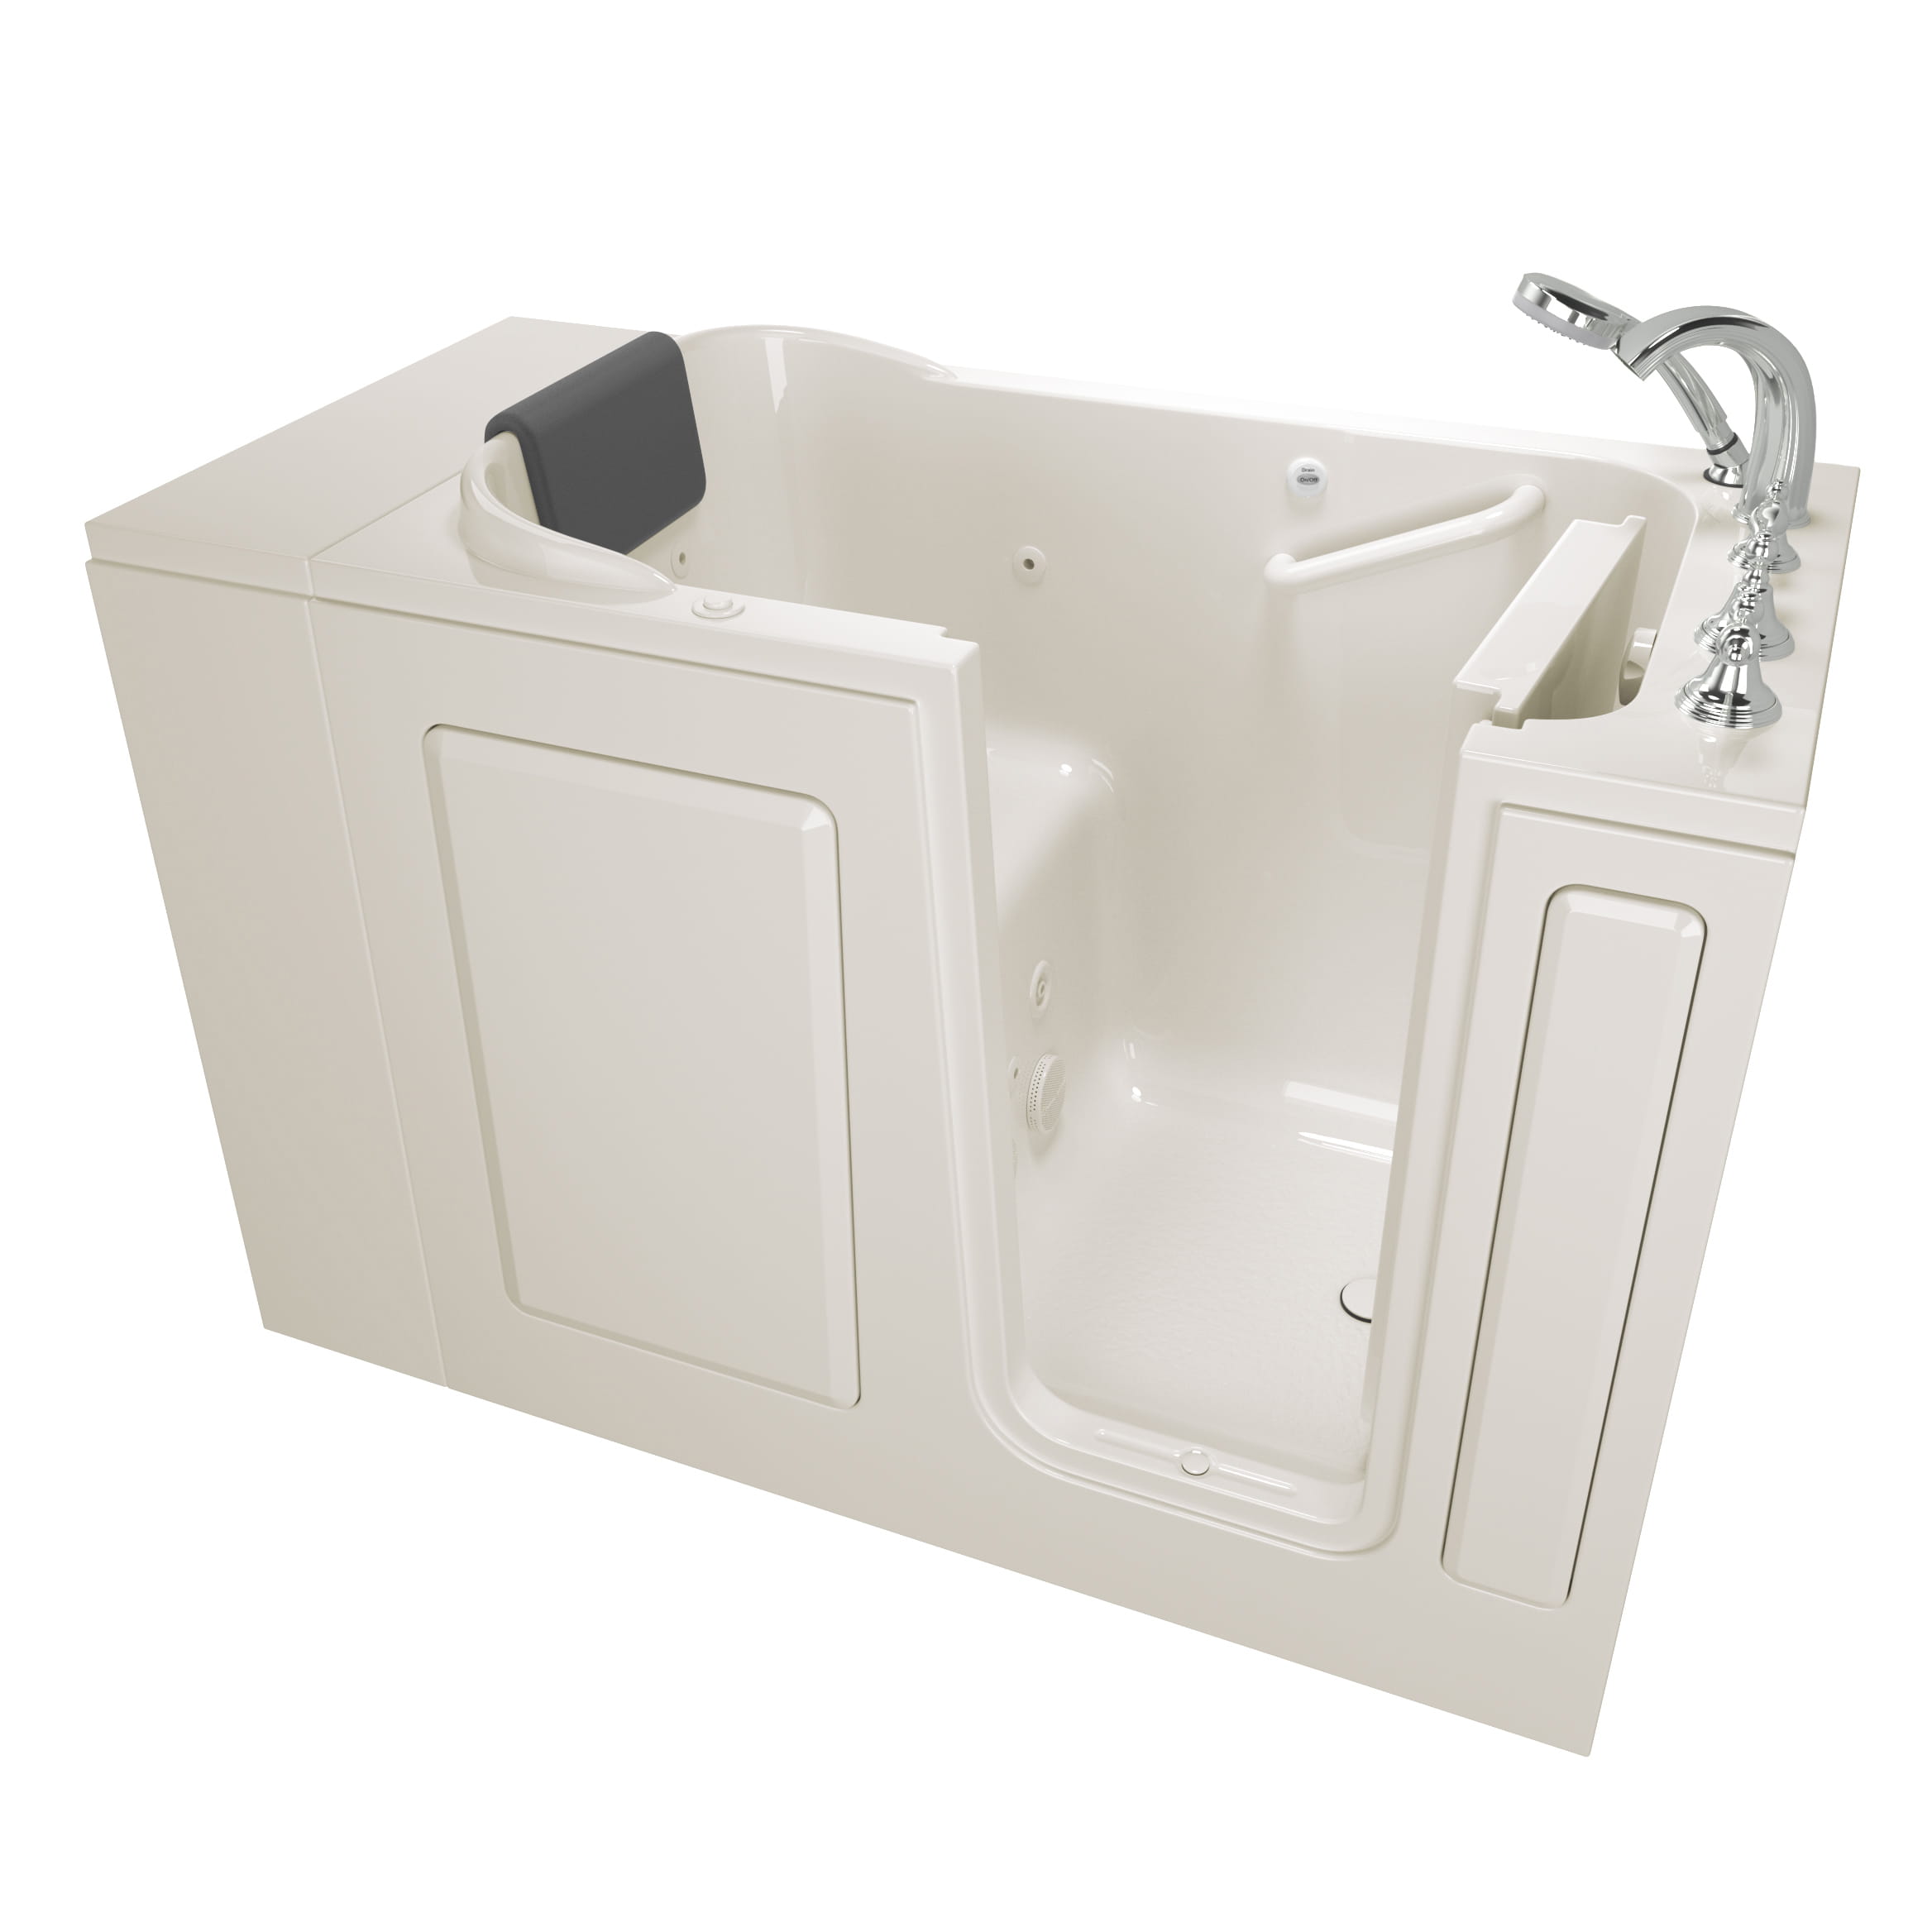 Gelcoat Premium Series 28 x 48 Inch Walk in Tub With Whirlpool System   Right Hand Drain With Faucet WIB LINEN